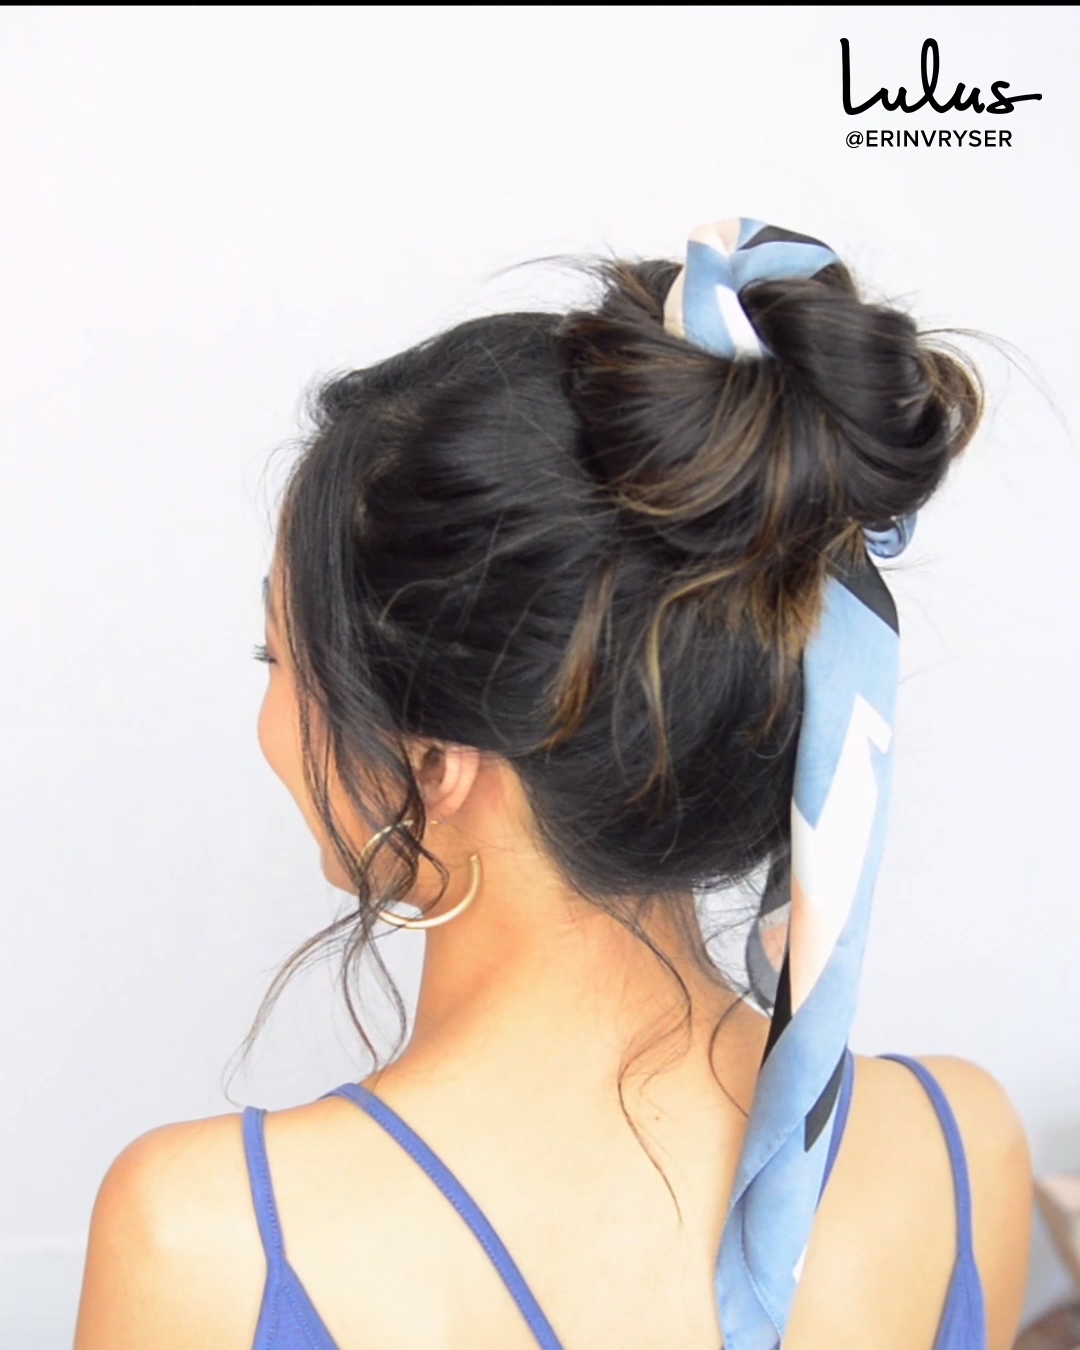 Need a Playful, Effortless Hairstyle? Try a Messy Bun with a Hair Scarf (It's Super Easy!) - Need a Playful, Effortless Hairstyle? Try a Messy Bun with a Hair Scarf (It's Super Easy!) -   12 style Hair messy ideas